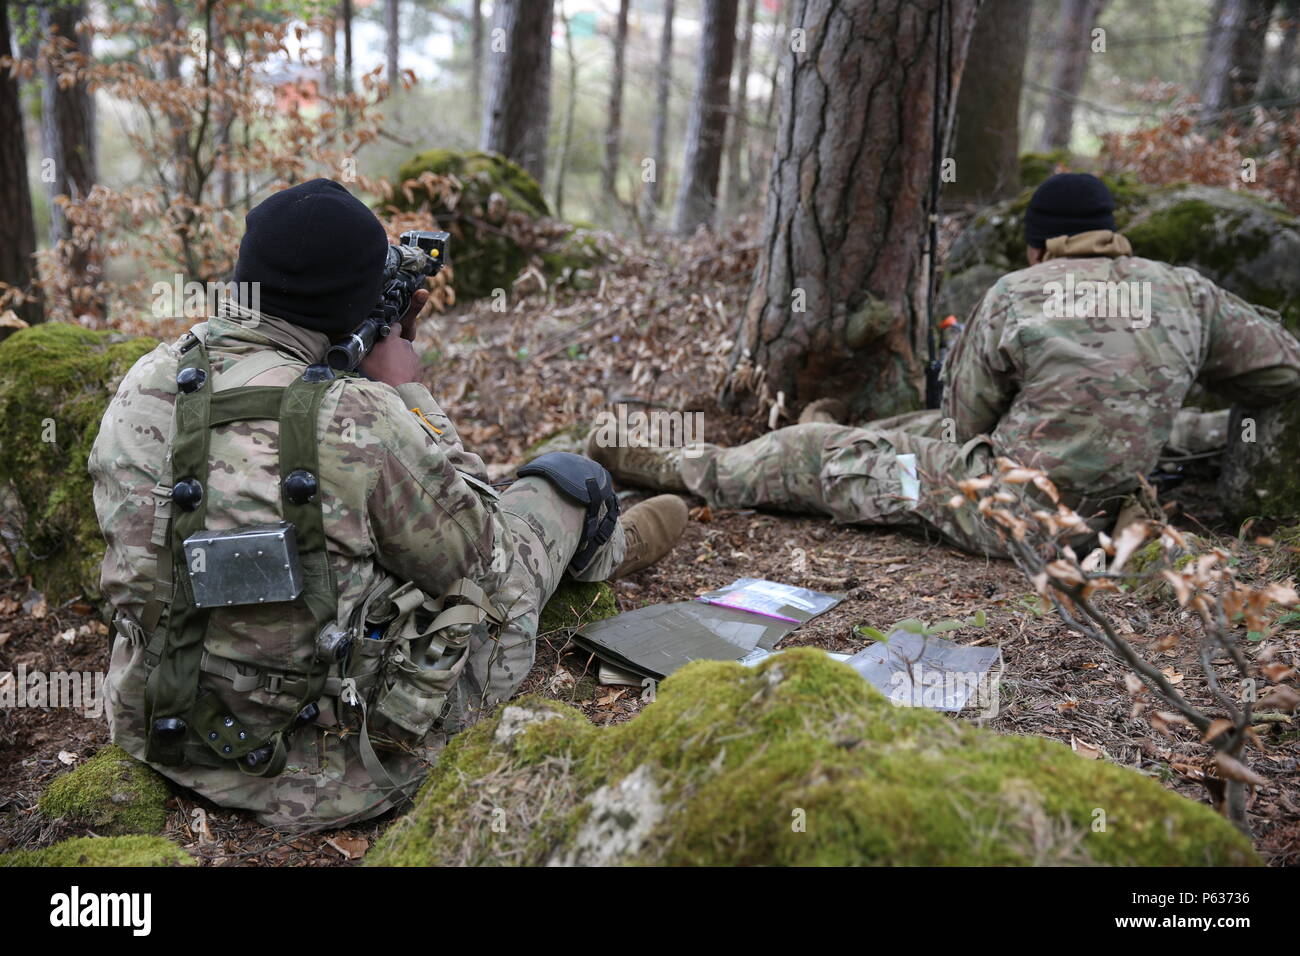 U.S. Soldiers of Bulldog Troop, 1st Squadron, 91st Cavalry Regiment, 173rd Airborne Brigade scout their objective while conducting reconnaissance operations during exercise Saber Junction 16 at the U.S. Army’s Joint Multinational Readiness Center (JMRC) in Hohenfels, Germany, April 13, 2016. Saber Junction 16 is the U.S. Army Europe’s 173rd Airborne Brigade’s combat training center certification exercise, taking place at the JMRC in Hohenfels, Germany, Mar. 31-Apr. 24, 2016.  The exercise is designed to evaluate the readiness of the Army’s Europe-based combat brigades to conduct unified land o Stock Photo